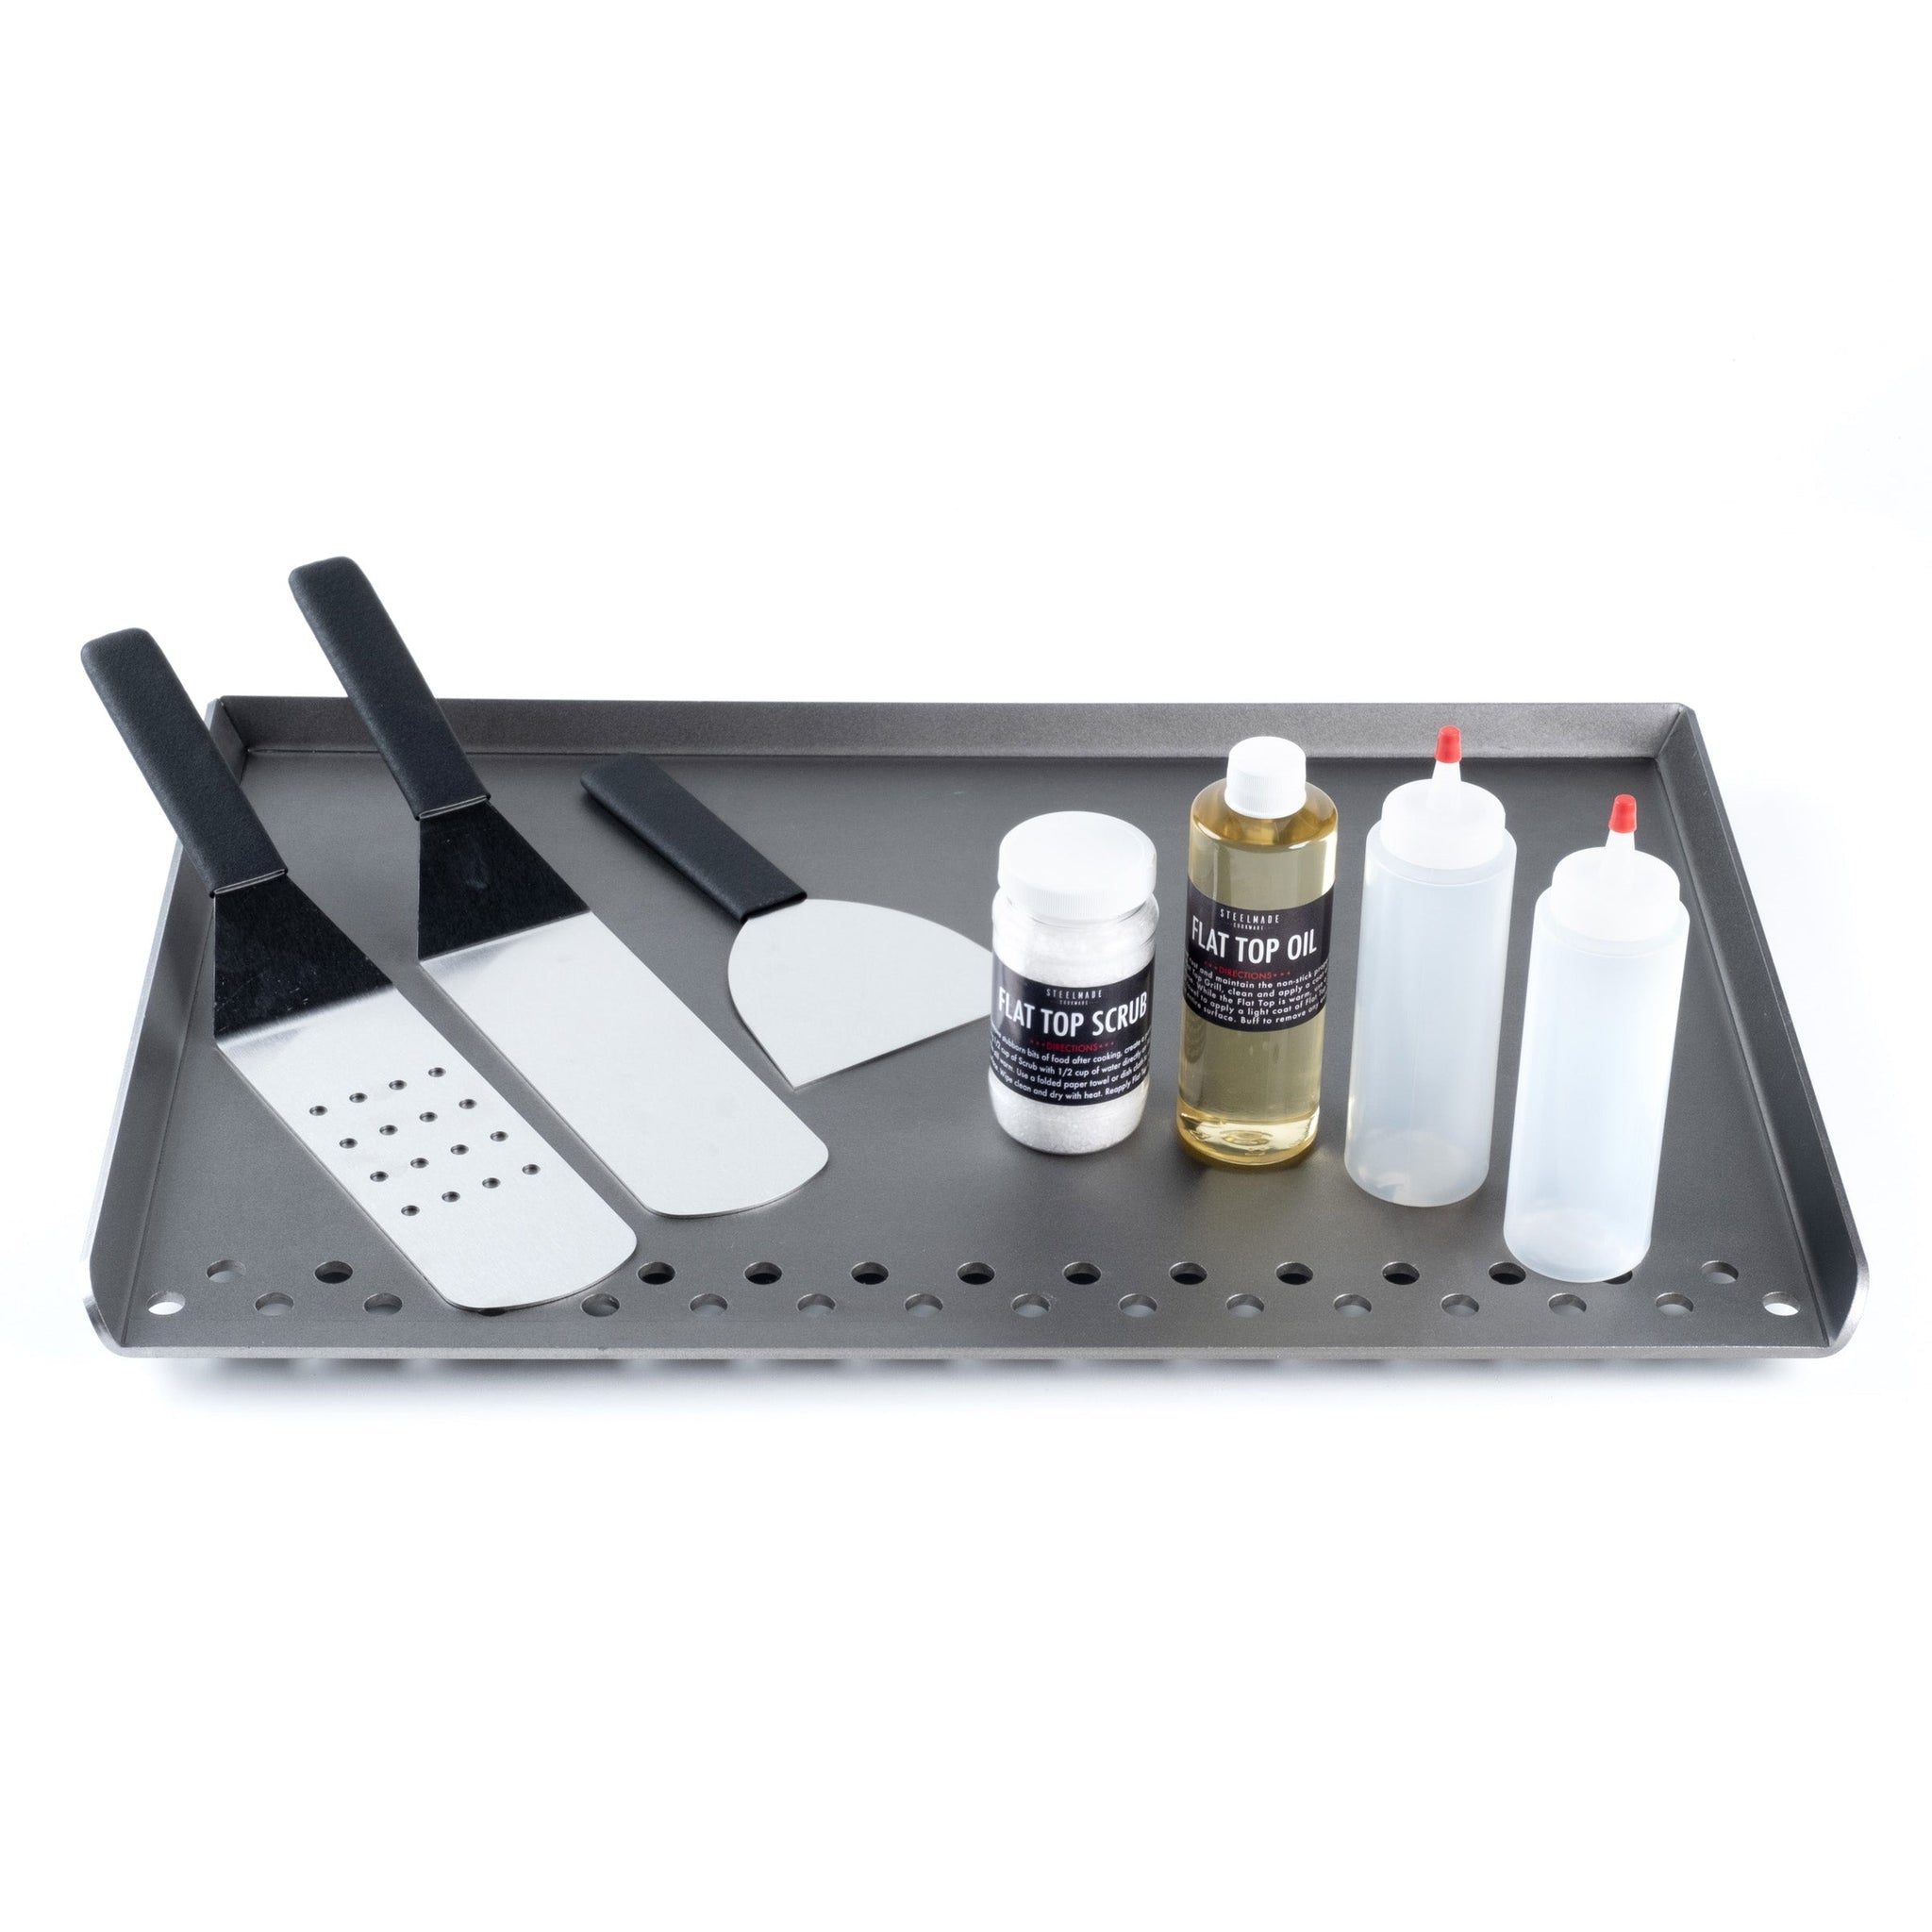 Ultimate Griddle Meats Gift Box - Steelmade